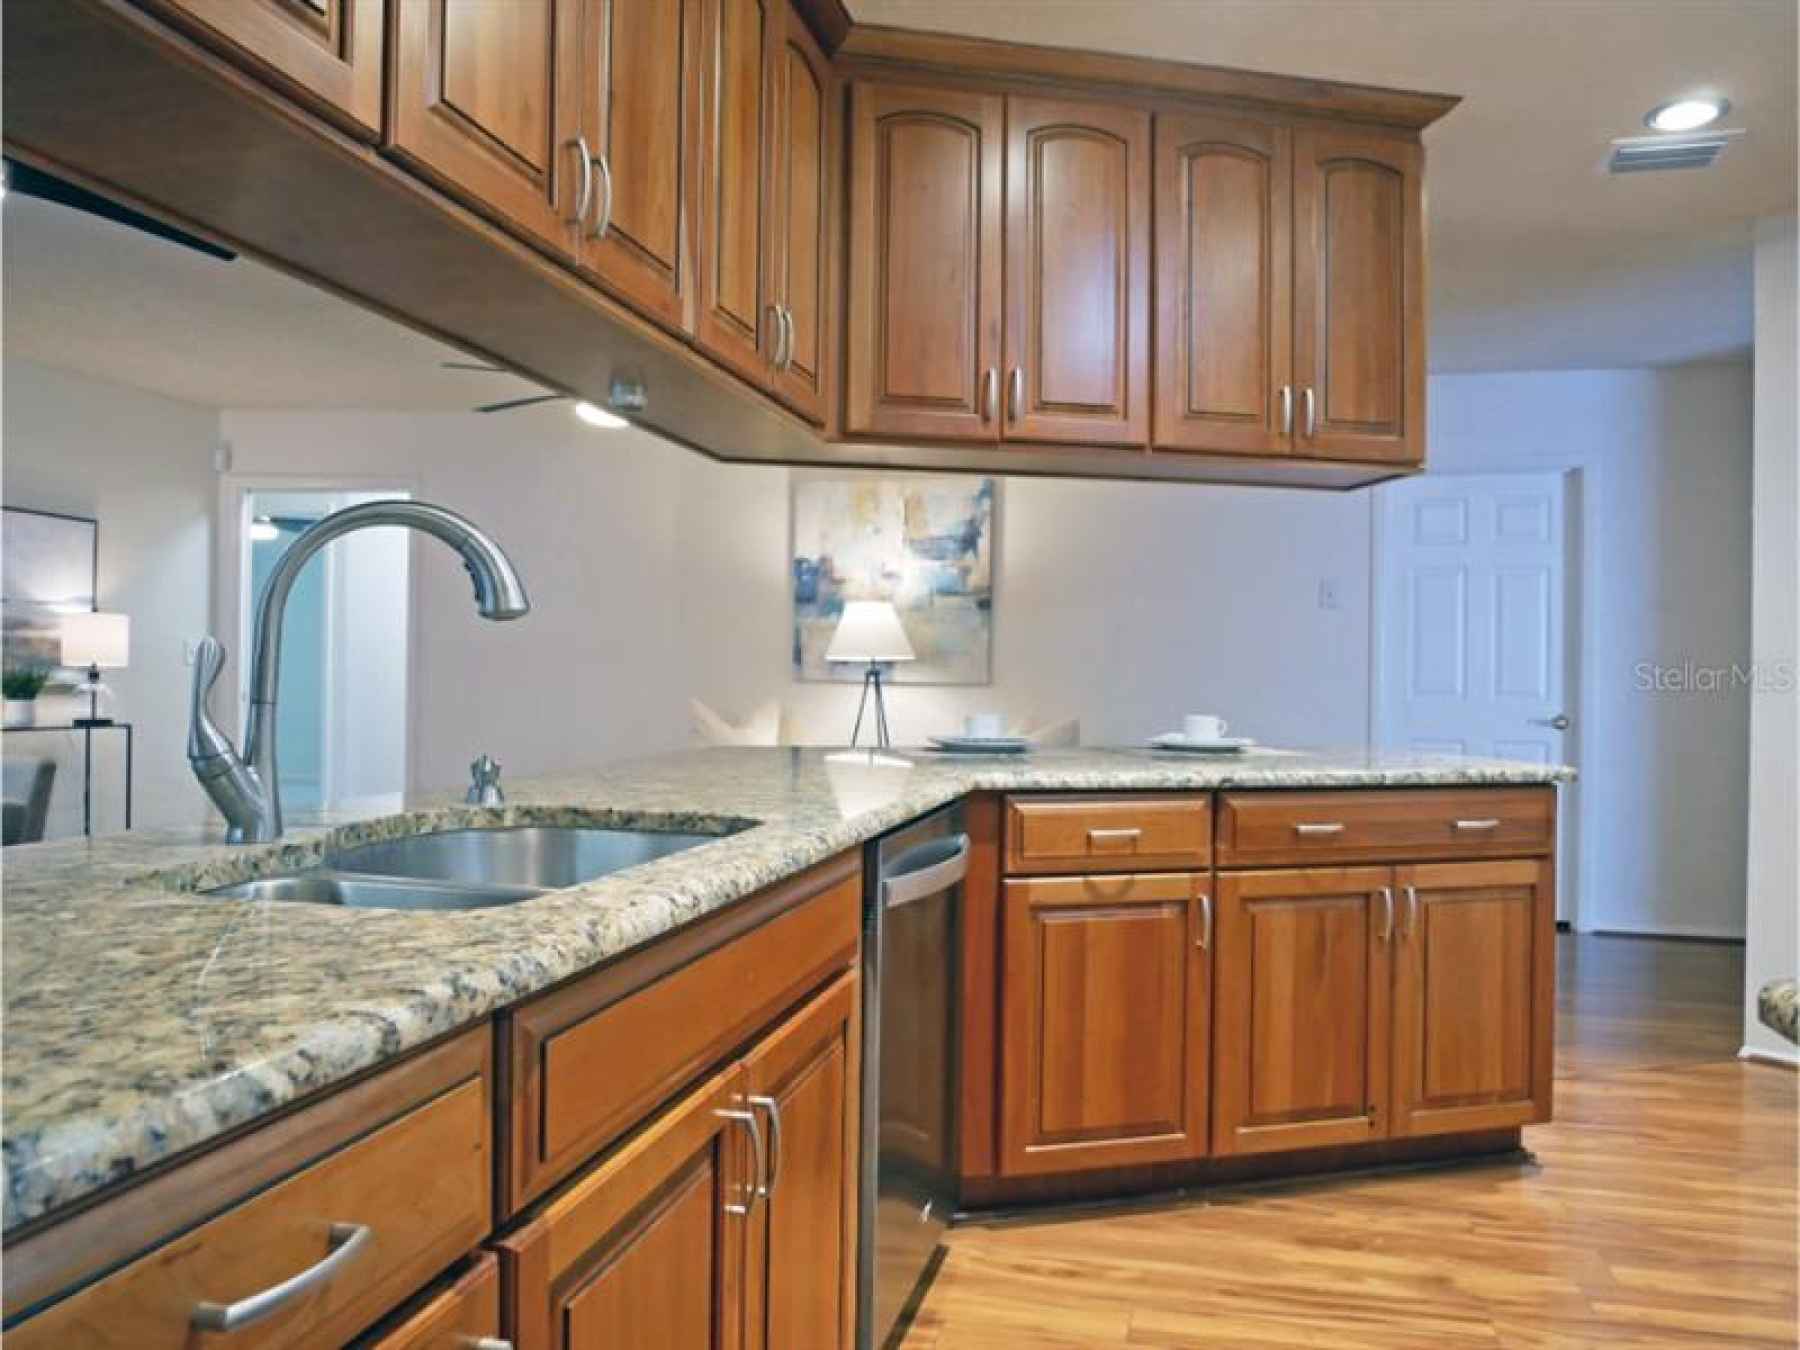 Kitchen, updated with wood cabinetry and granite countertops.